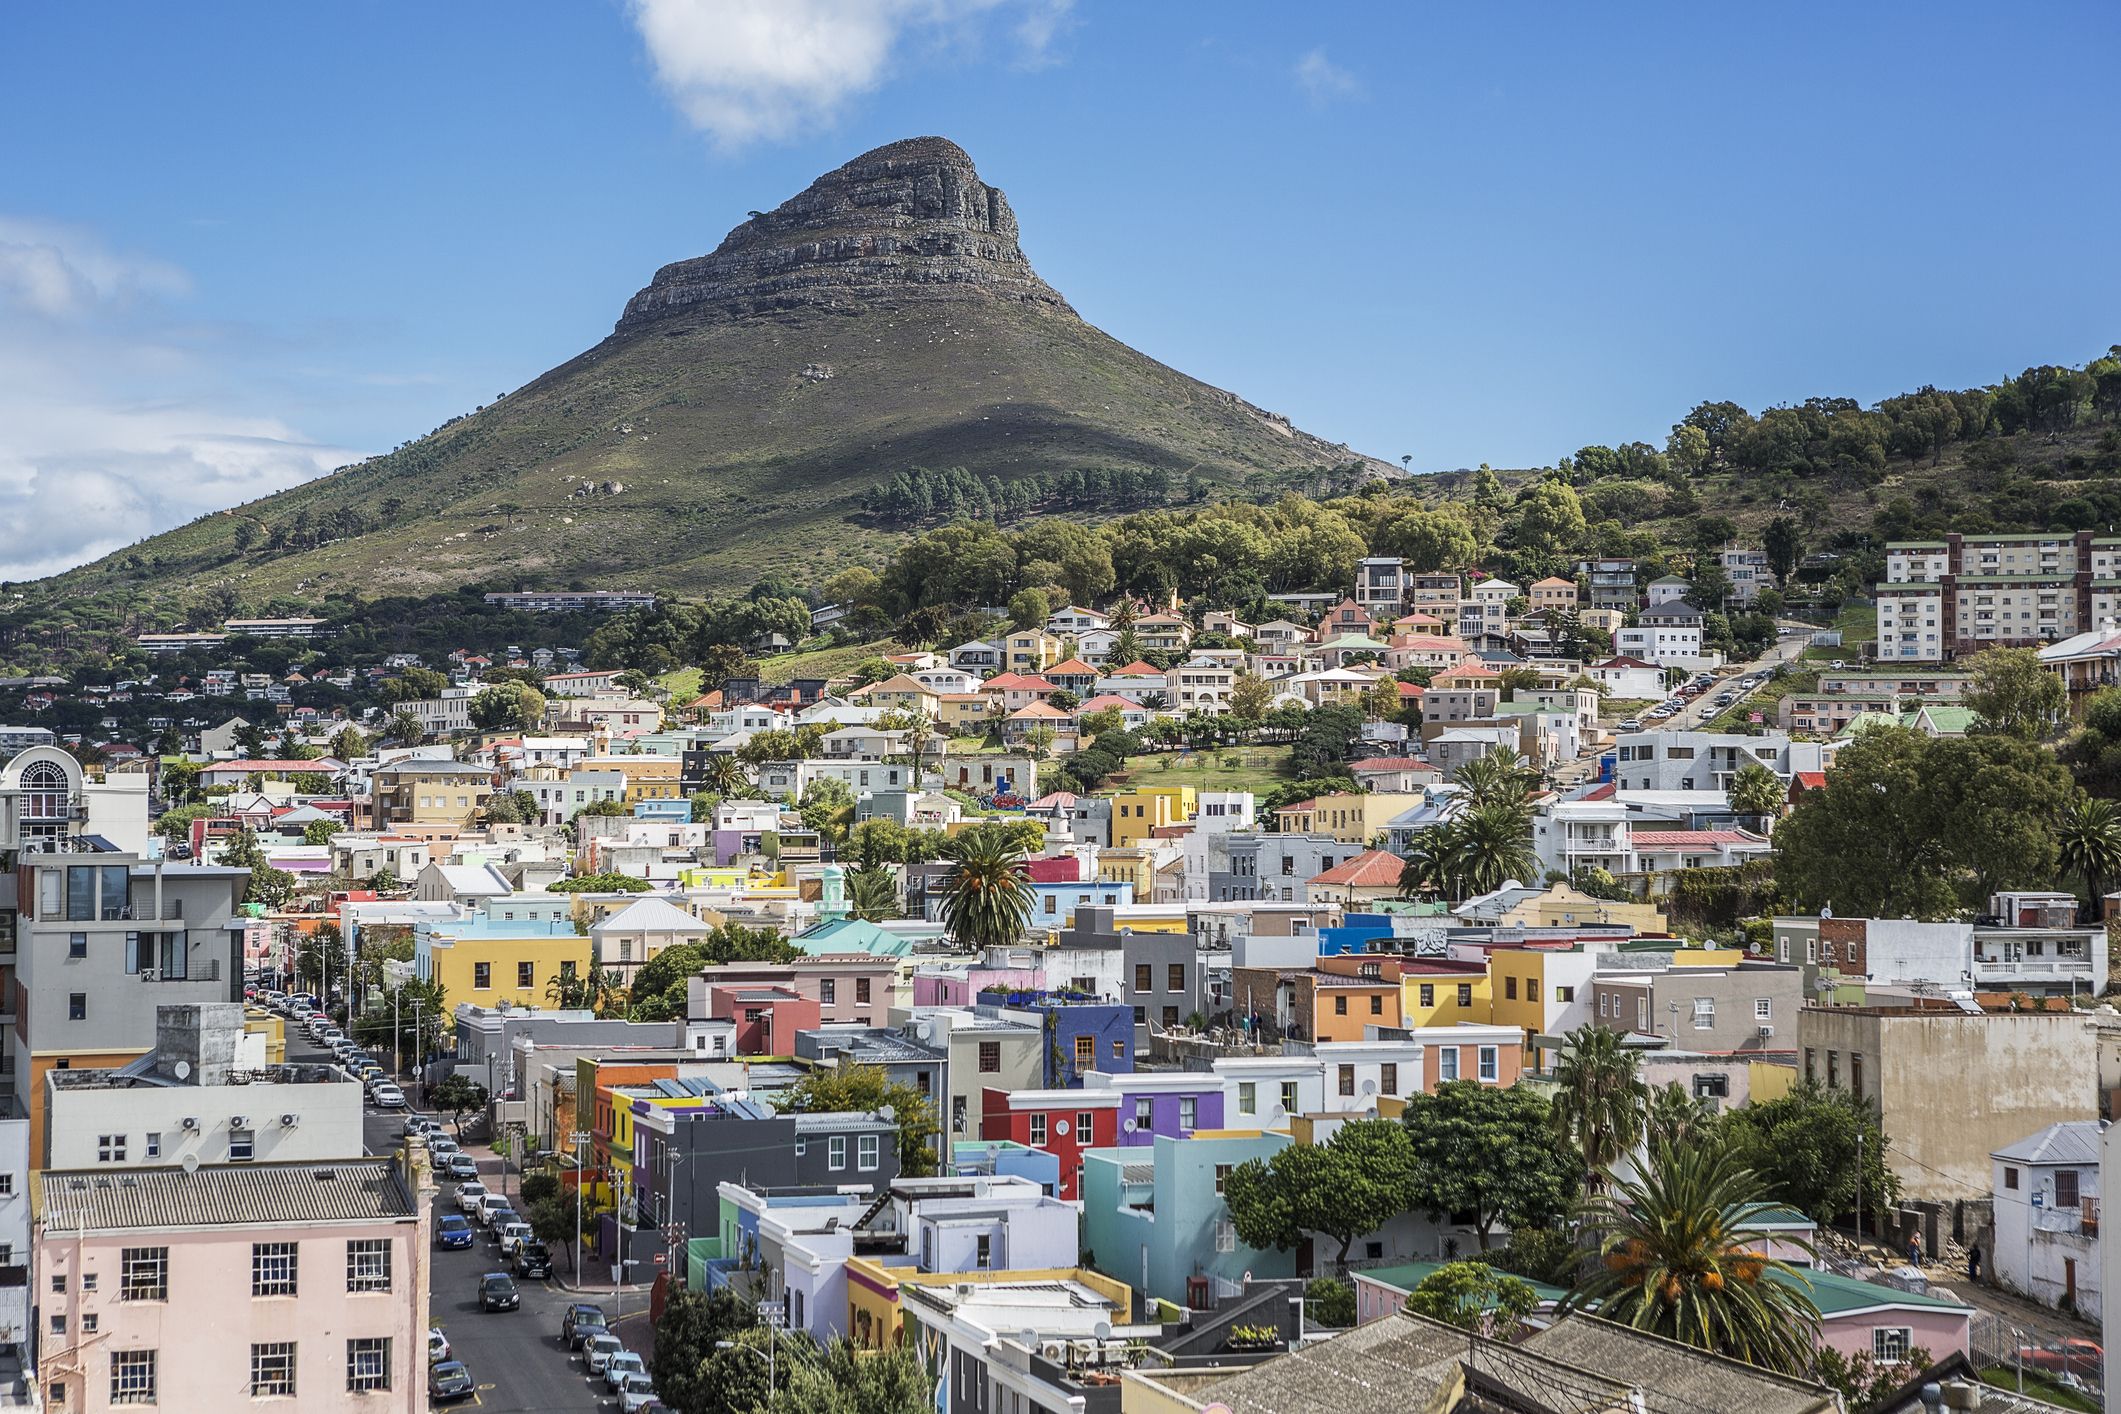 Colorful houses in the Bo-Kaap district with Signal Hill in the background